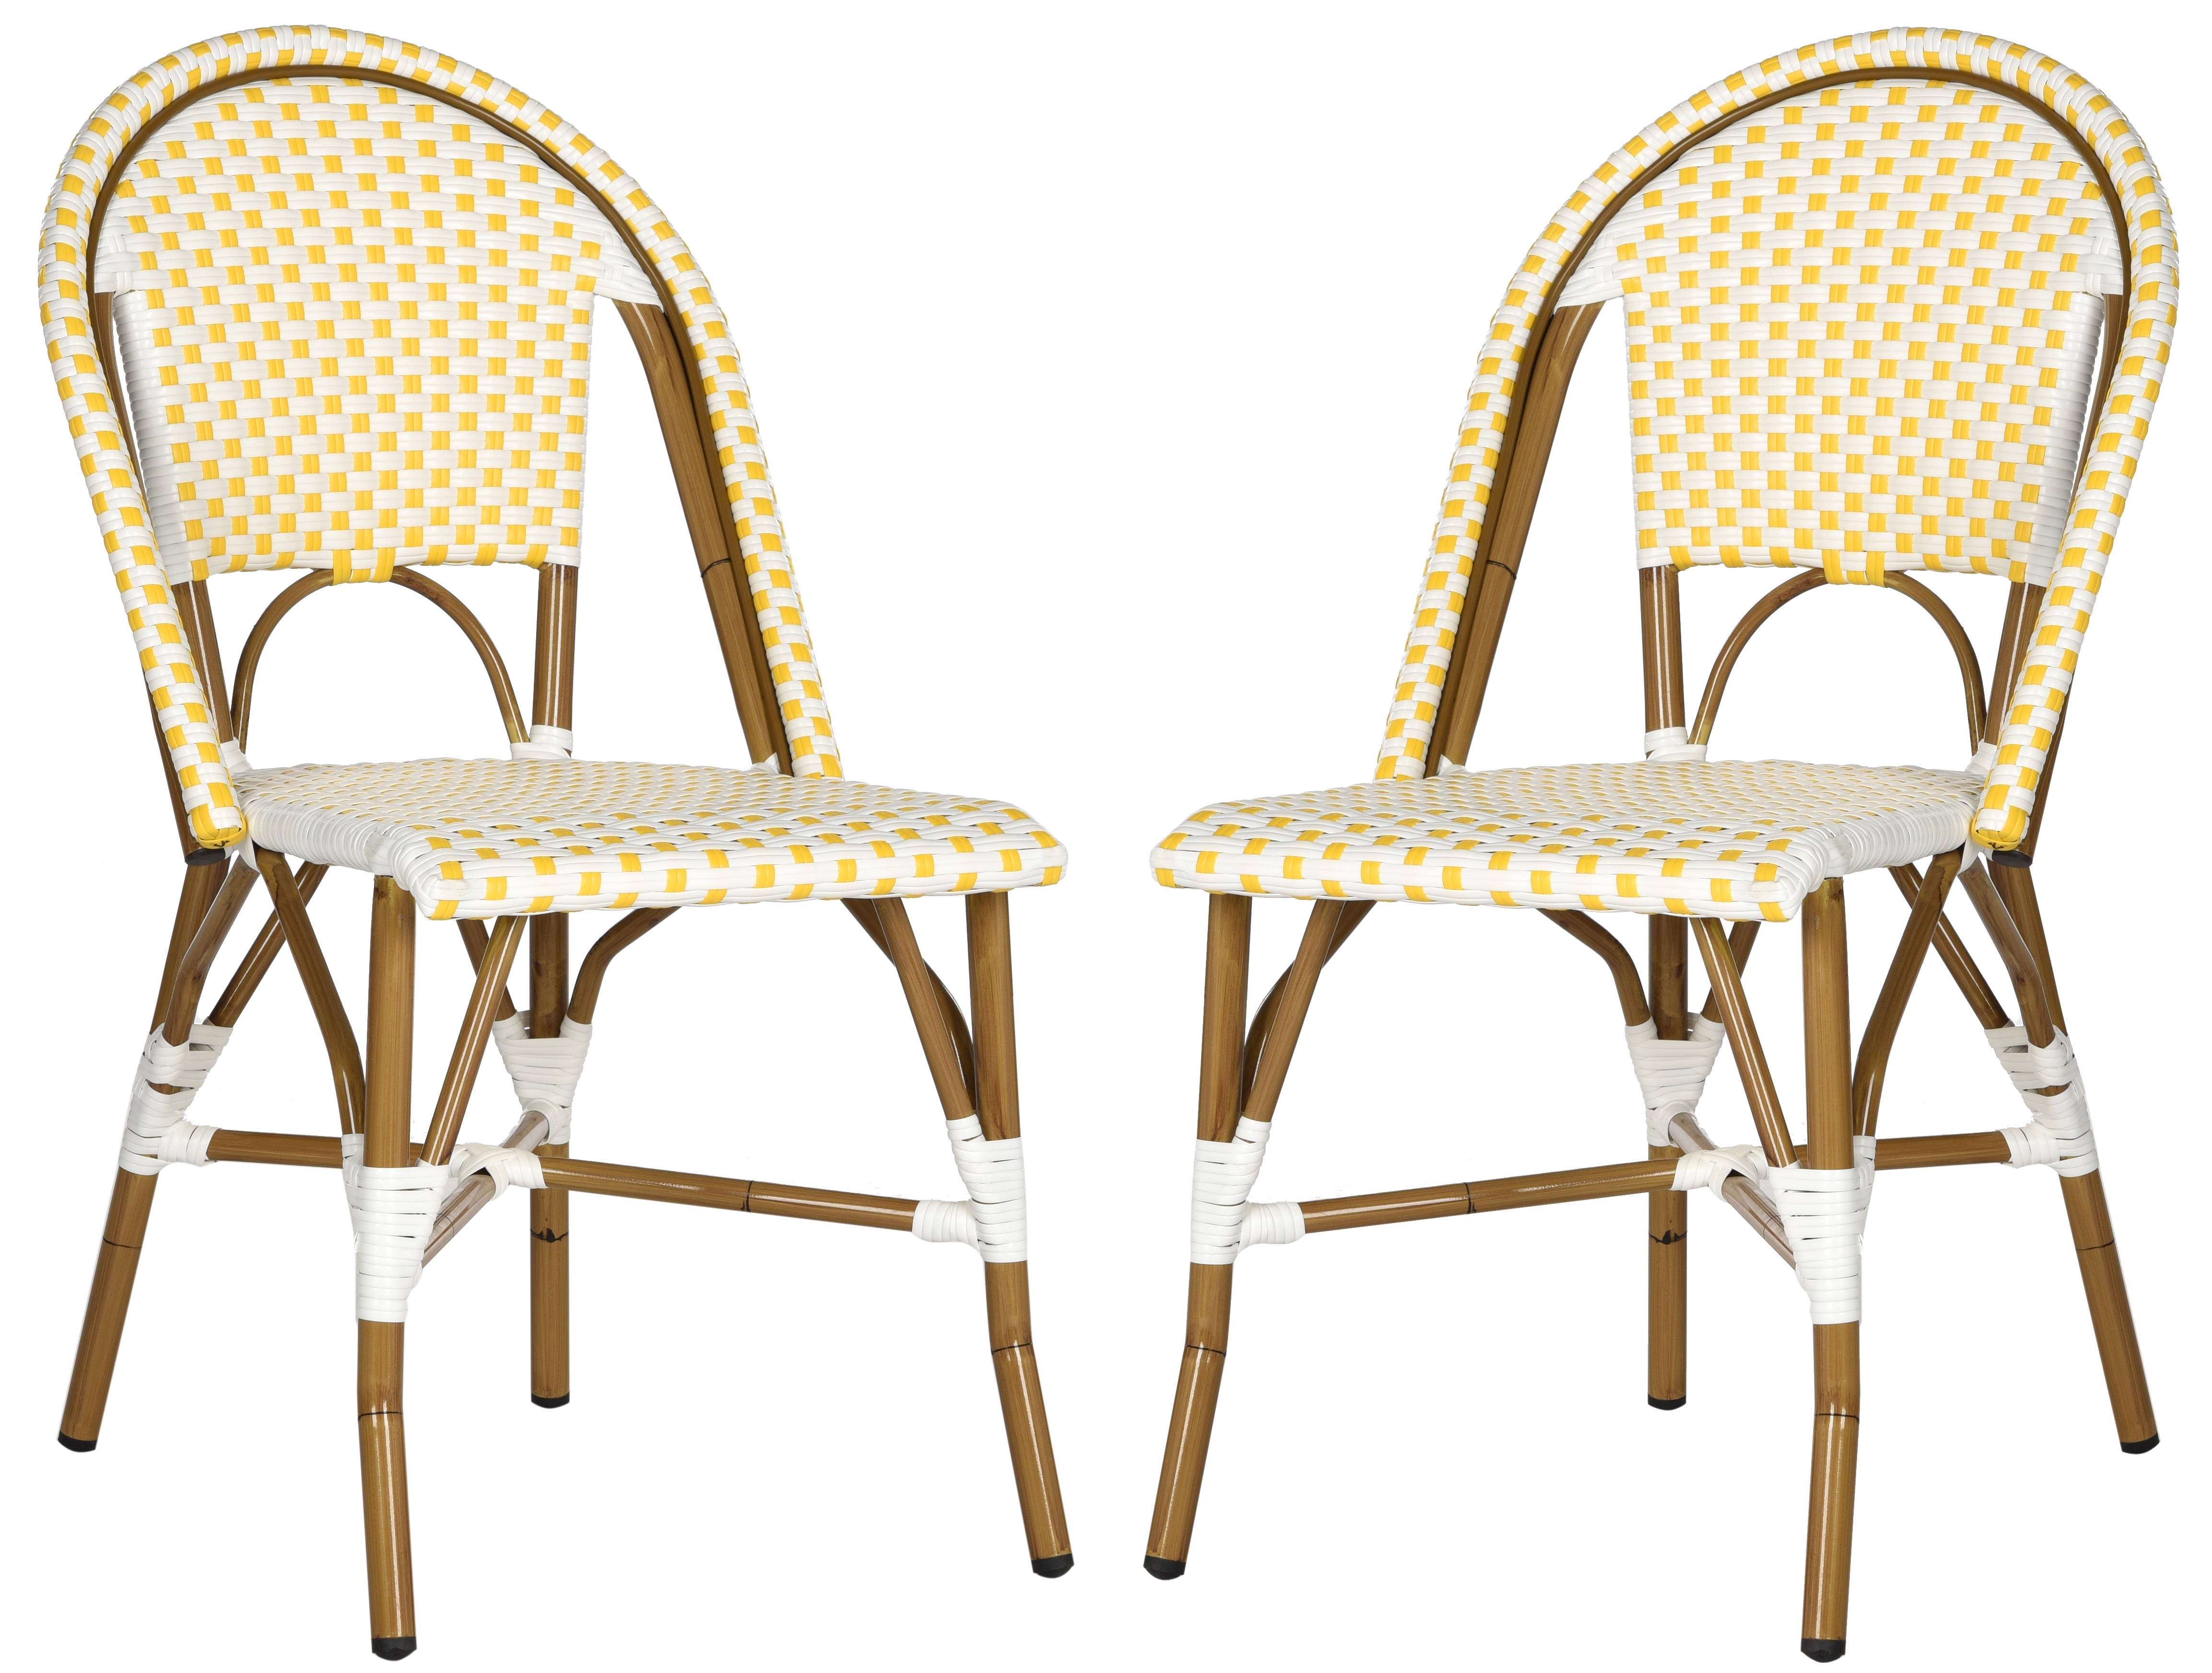 Salcha Indoor-Outdoor French Bistro Stacking Side Chair - Yellow/White/Light Brown - Arlo Home - Image 0